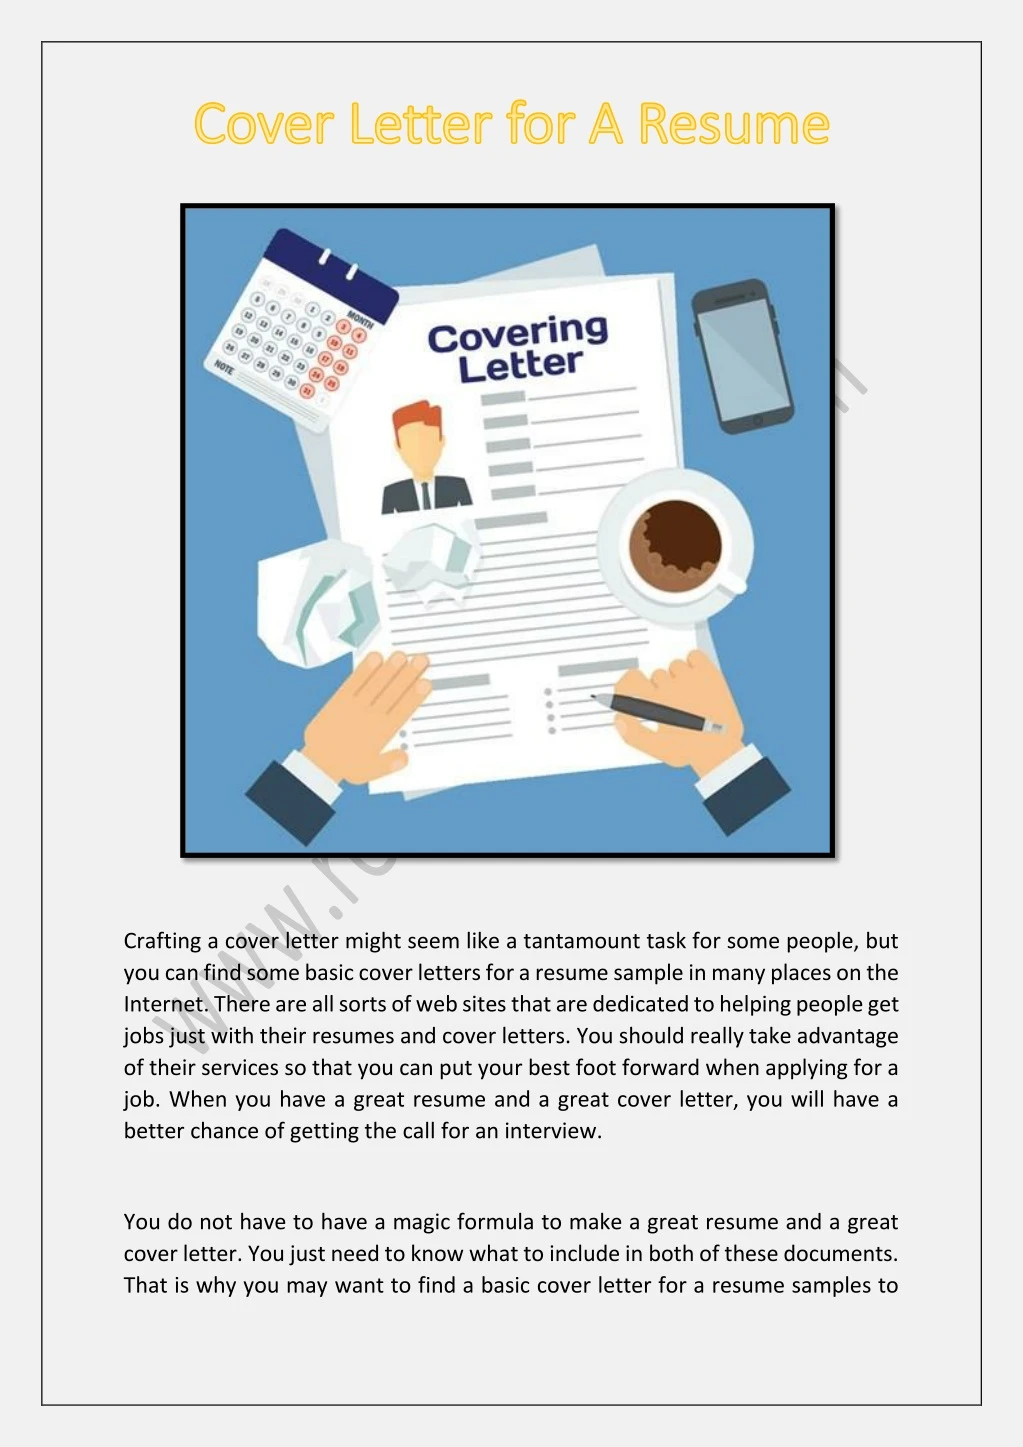 crafting a cover letter might seem like